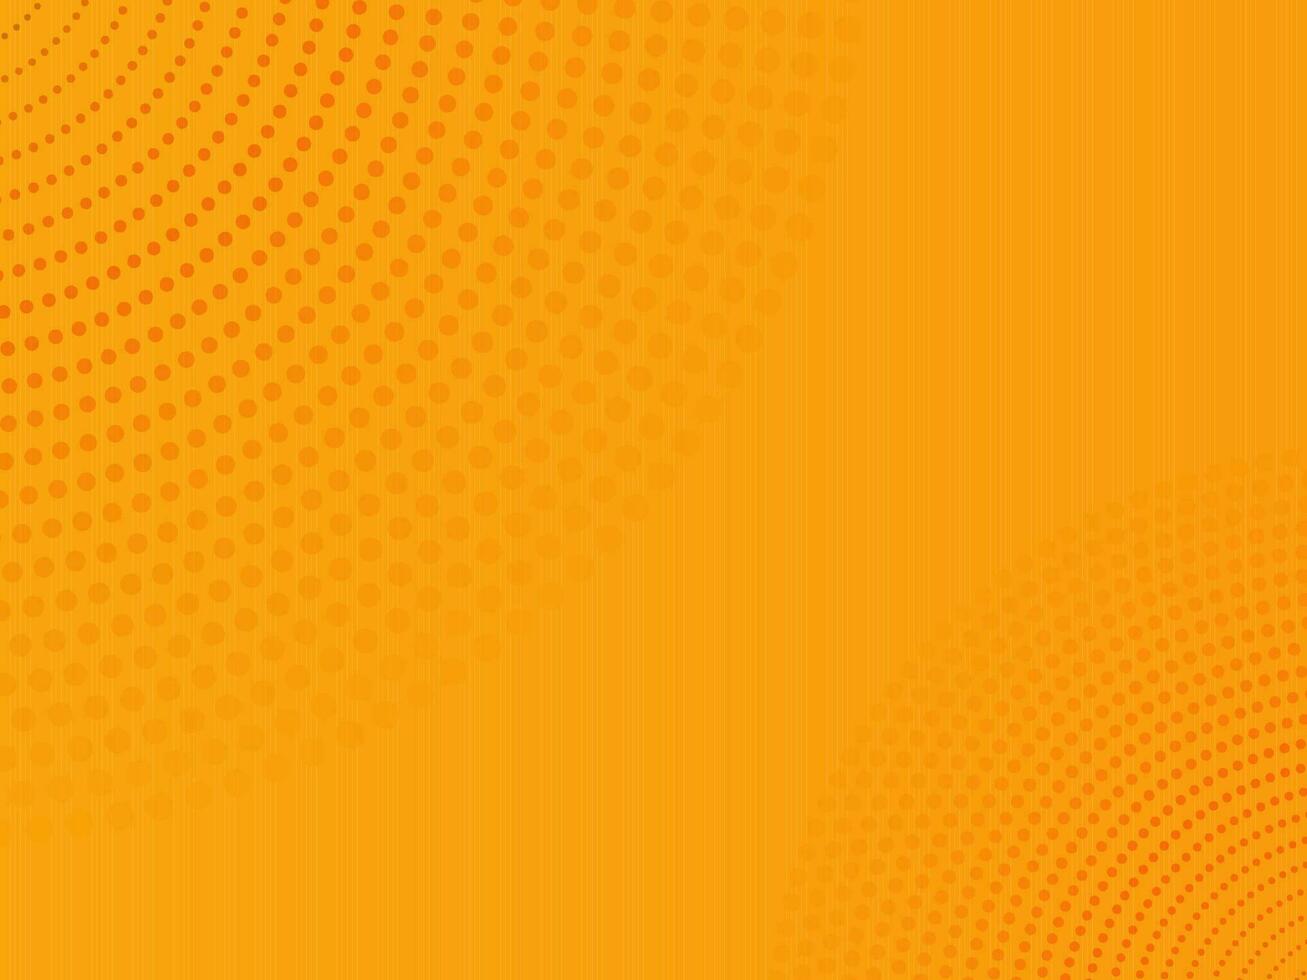 Abstract Orange Dots Pattern Background. vector